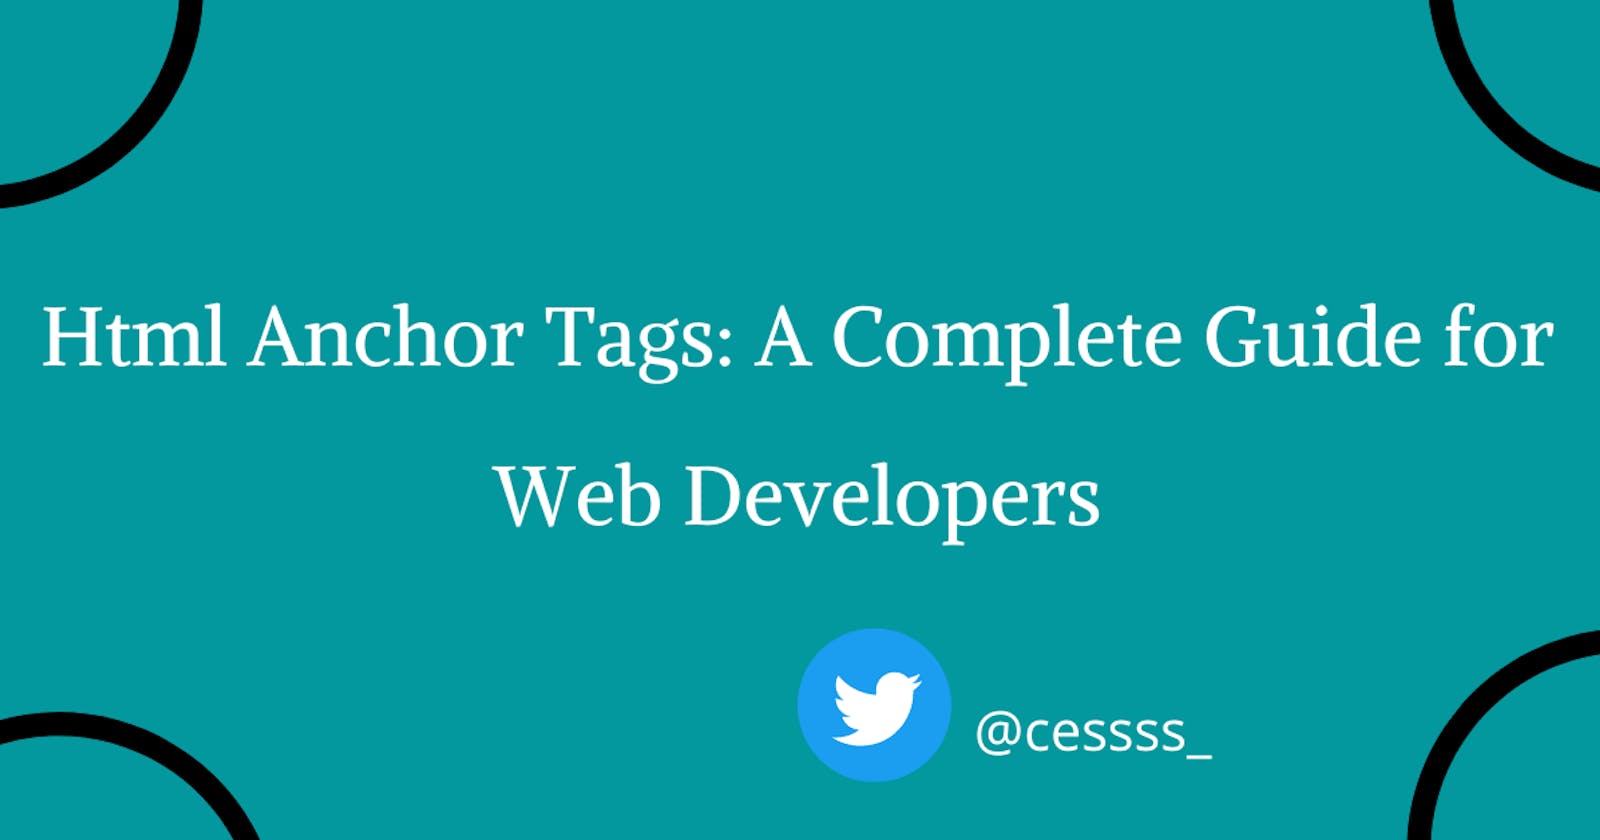 Html Anchor Tags: A Complete Guide for Web Developers